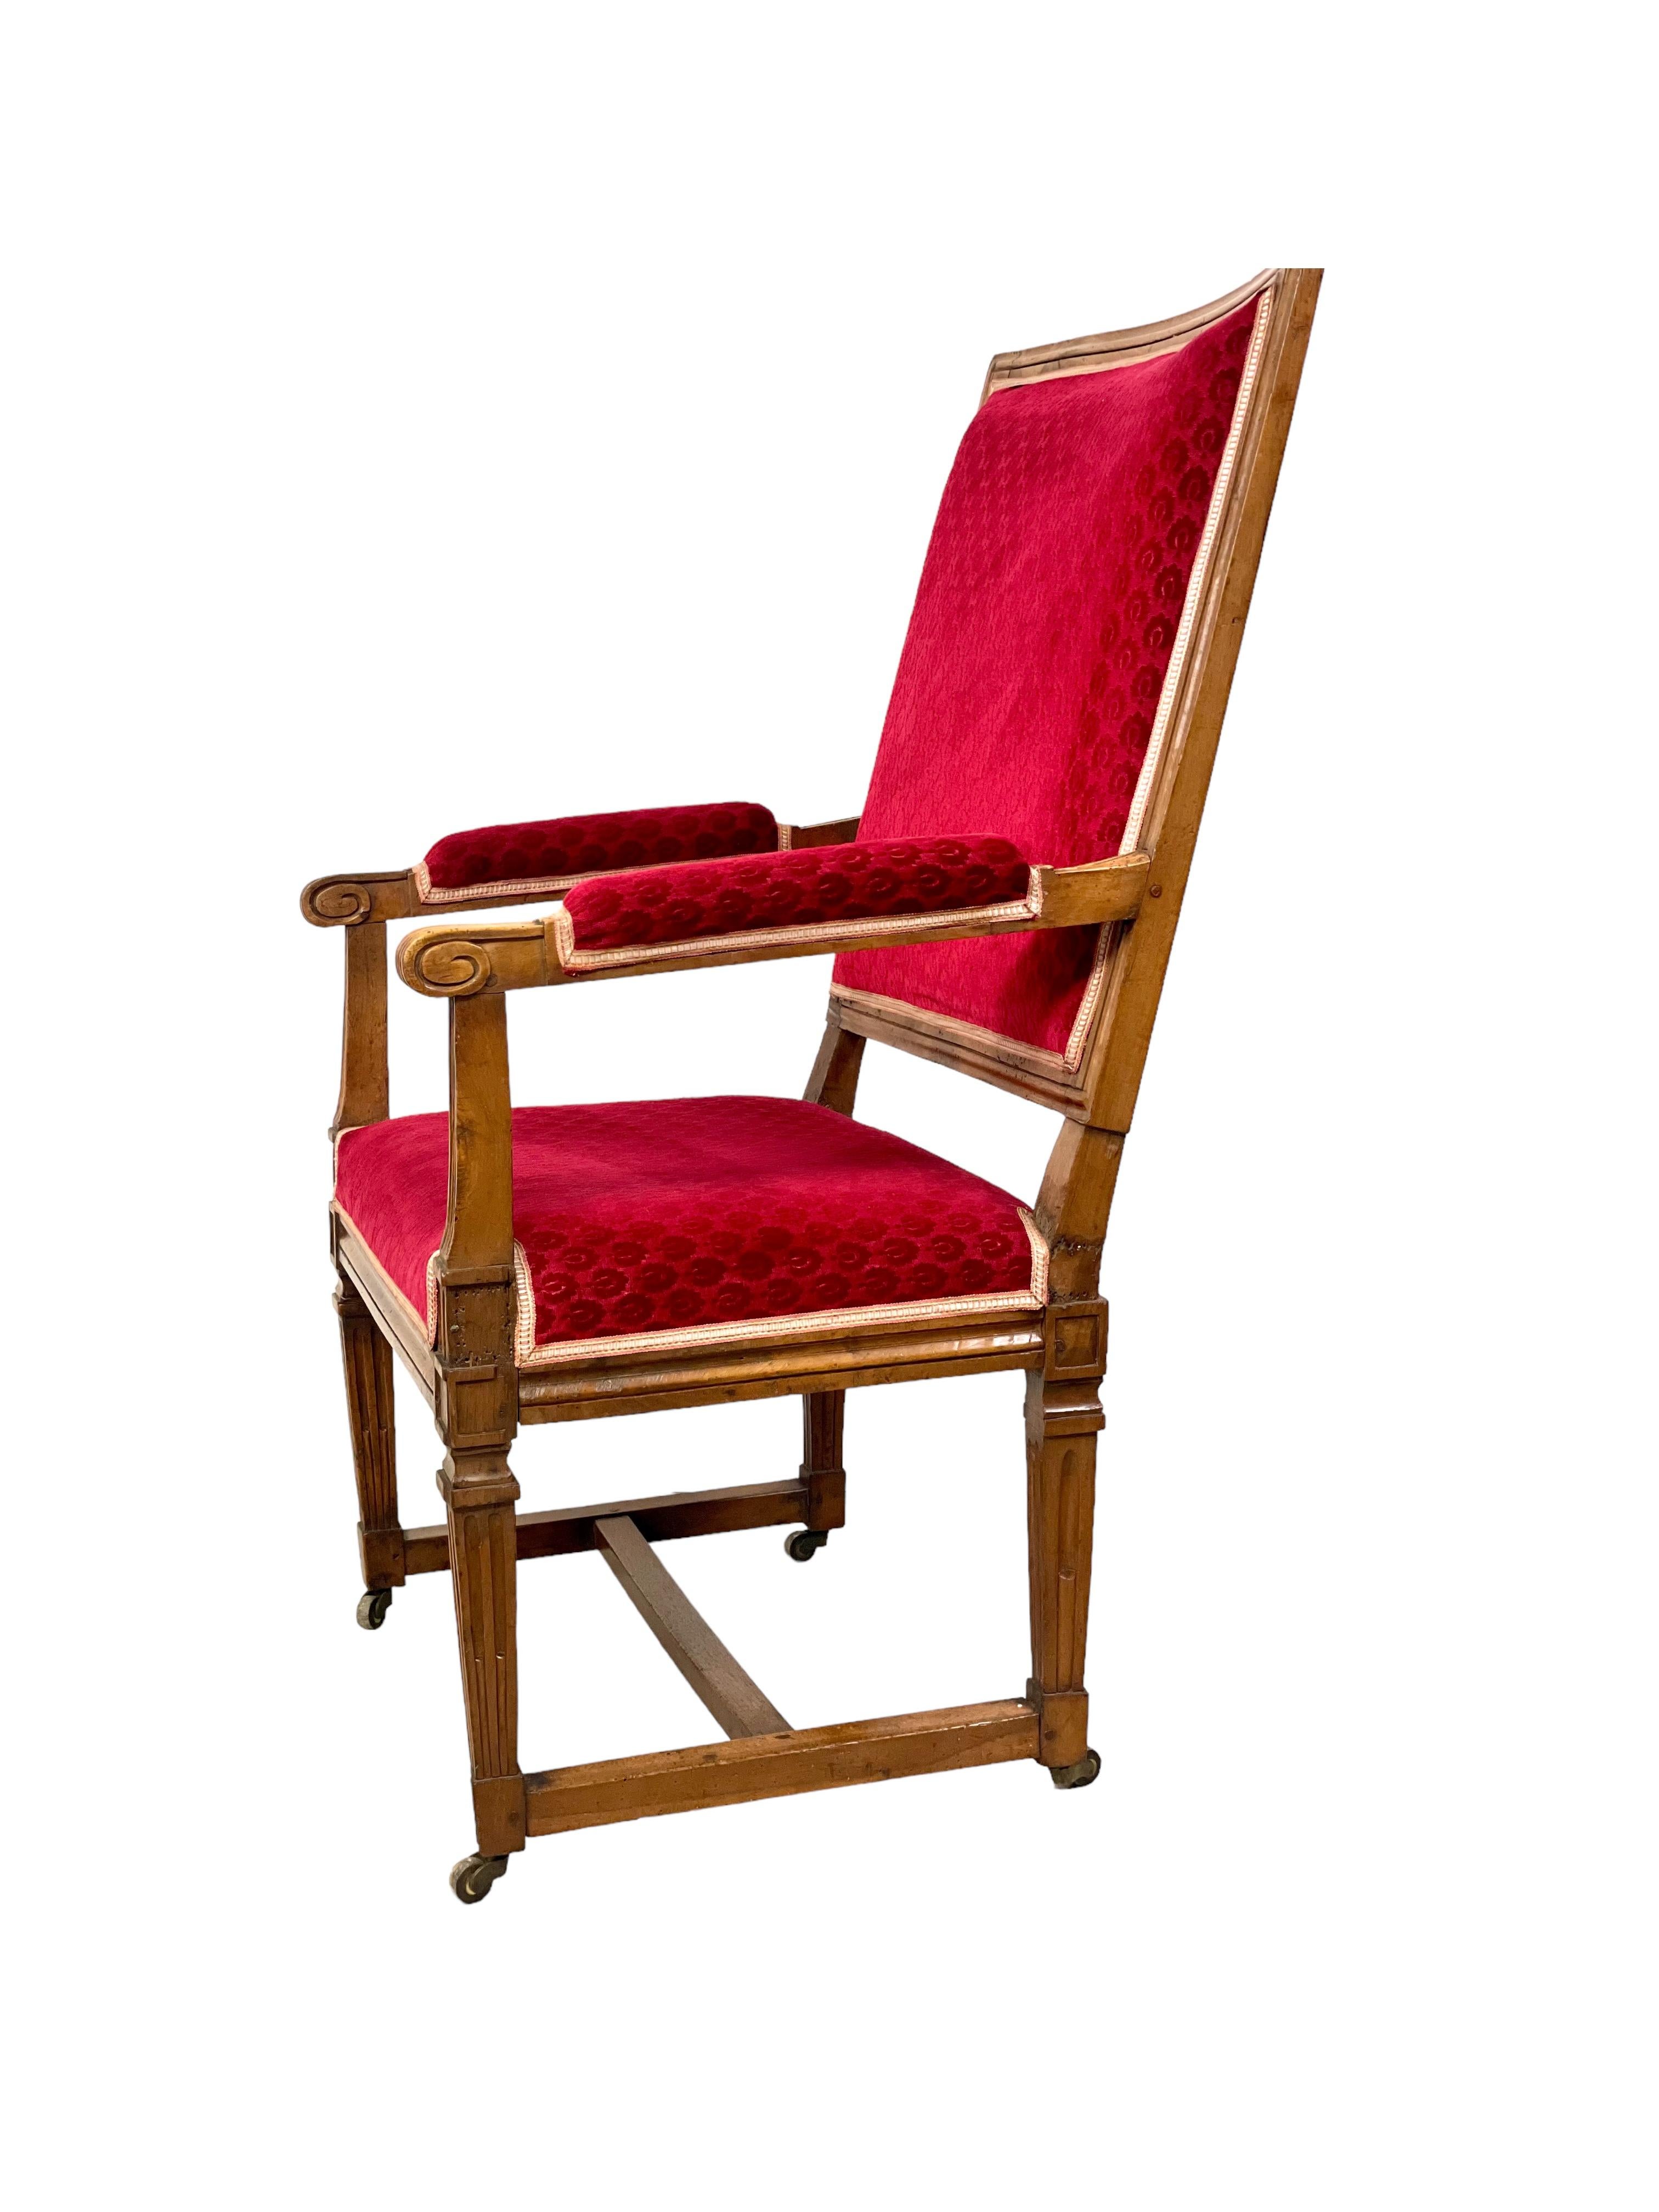 This supremely comfortable antique French fauteuil is a wonderful example of the Louis XVI style, with its square, padded, slightly reclining back, fluted legs and open arms. Hand carved from walnut in the 18th century, the deep, rich finish of the